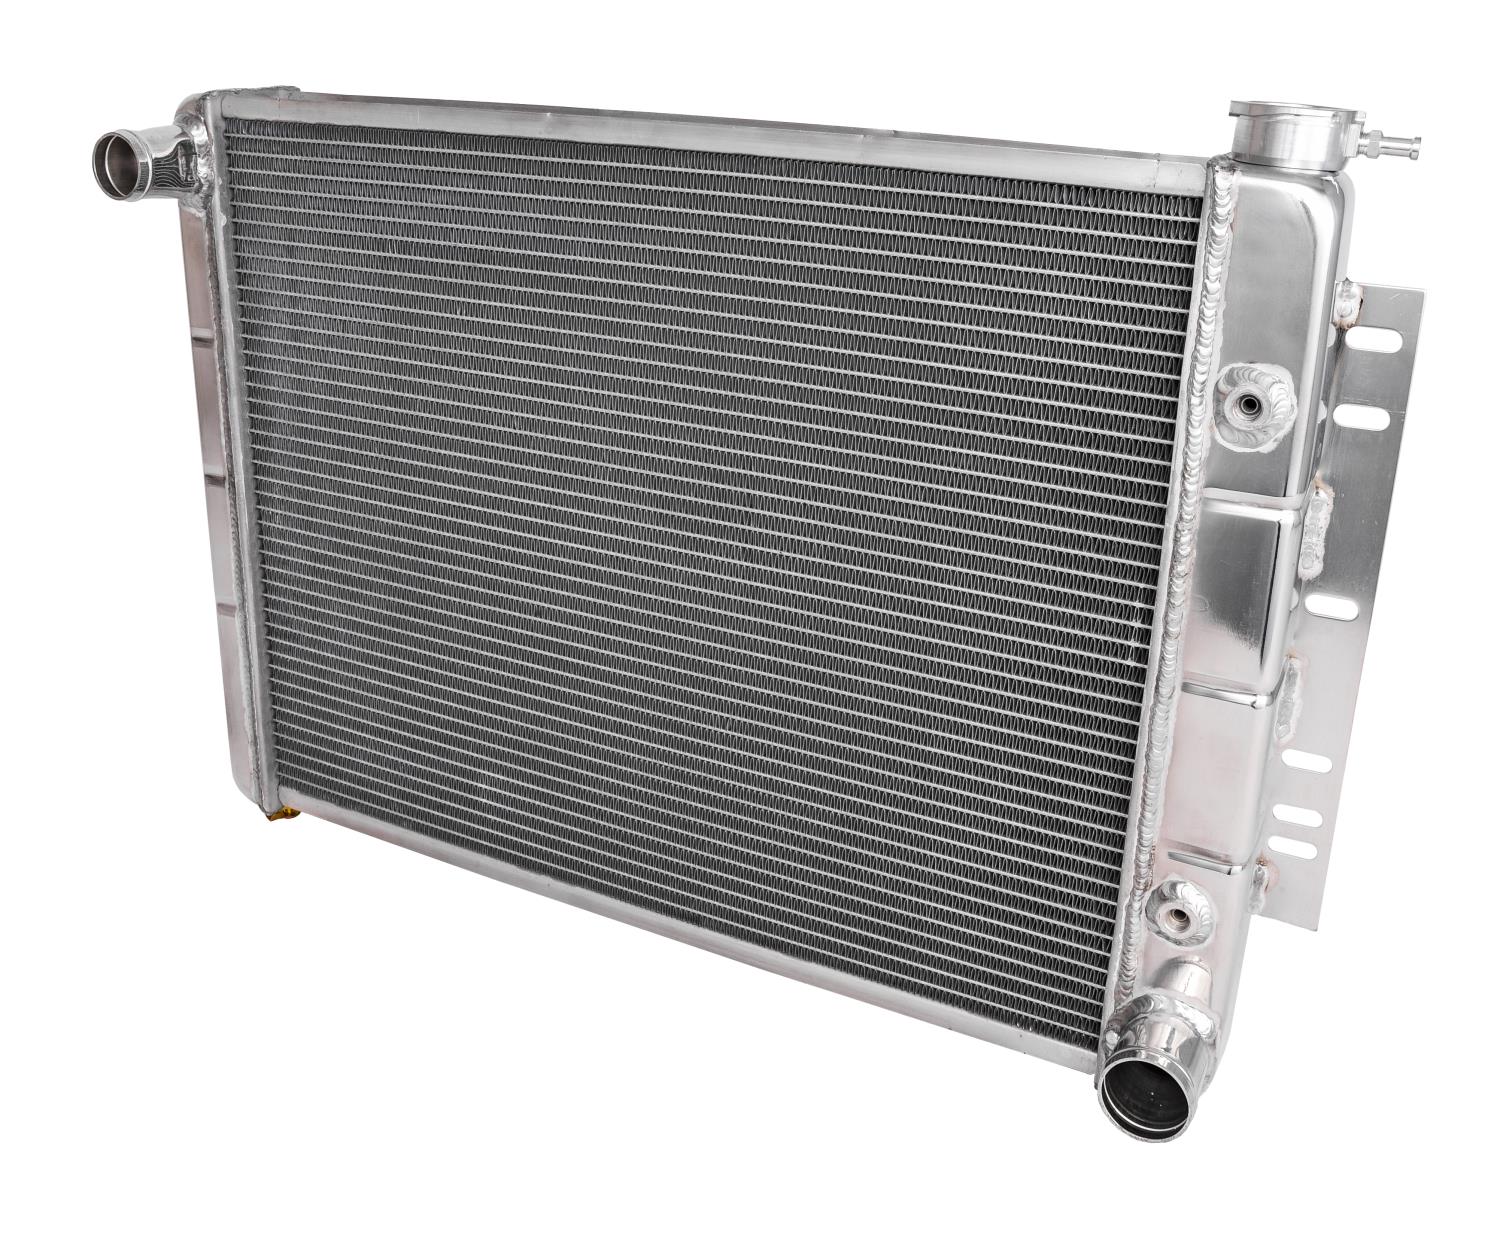 Ready Fit Aluminum Radiator for Select 1959-1970 Chevrolet, Select 1971-1981 Chrysler & Plymouth Models [ Auto Trans.]